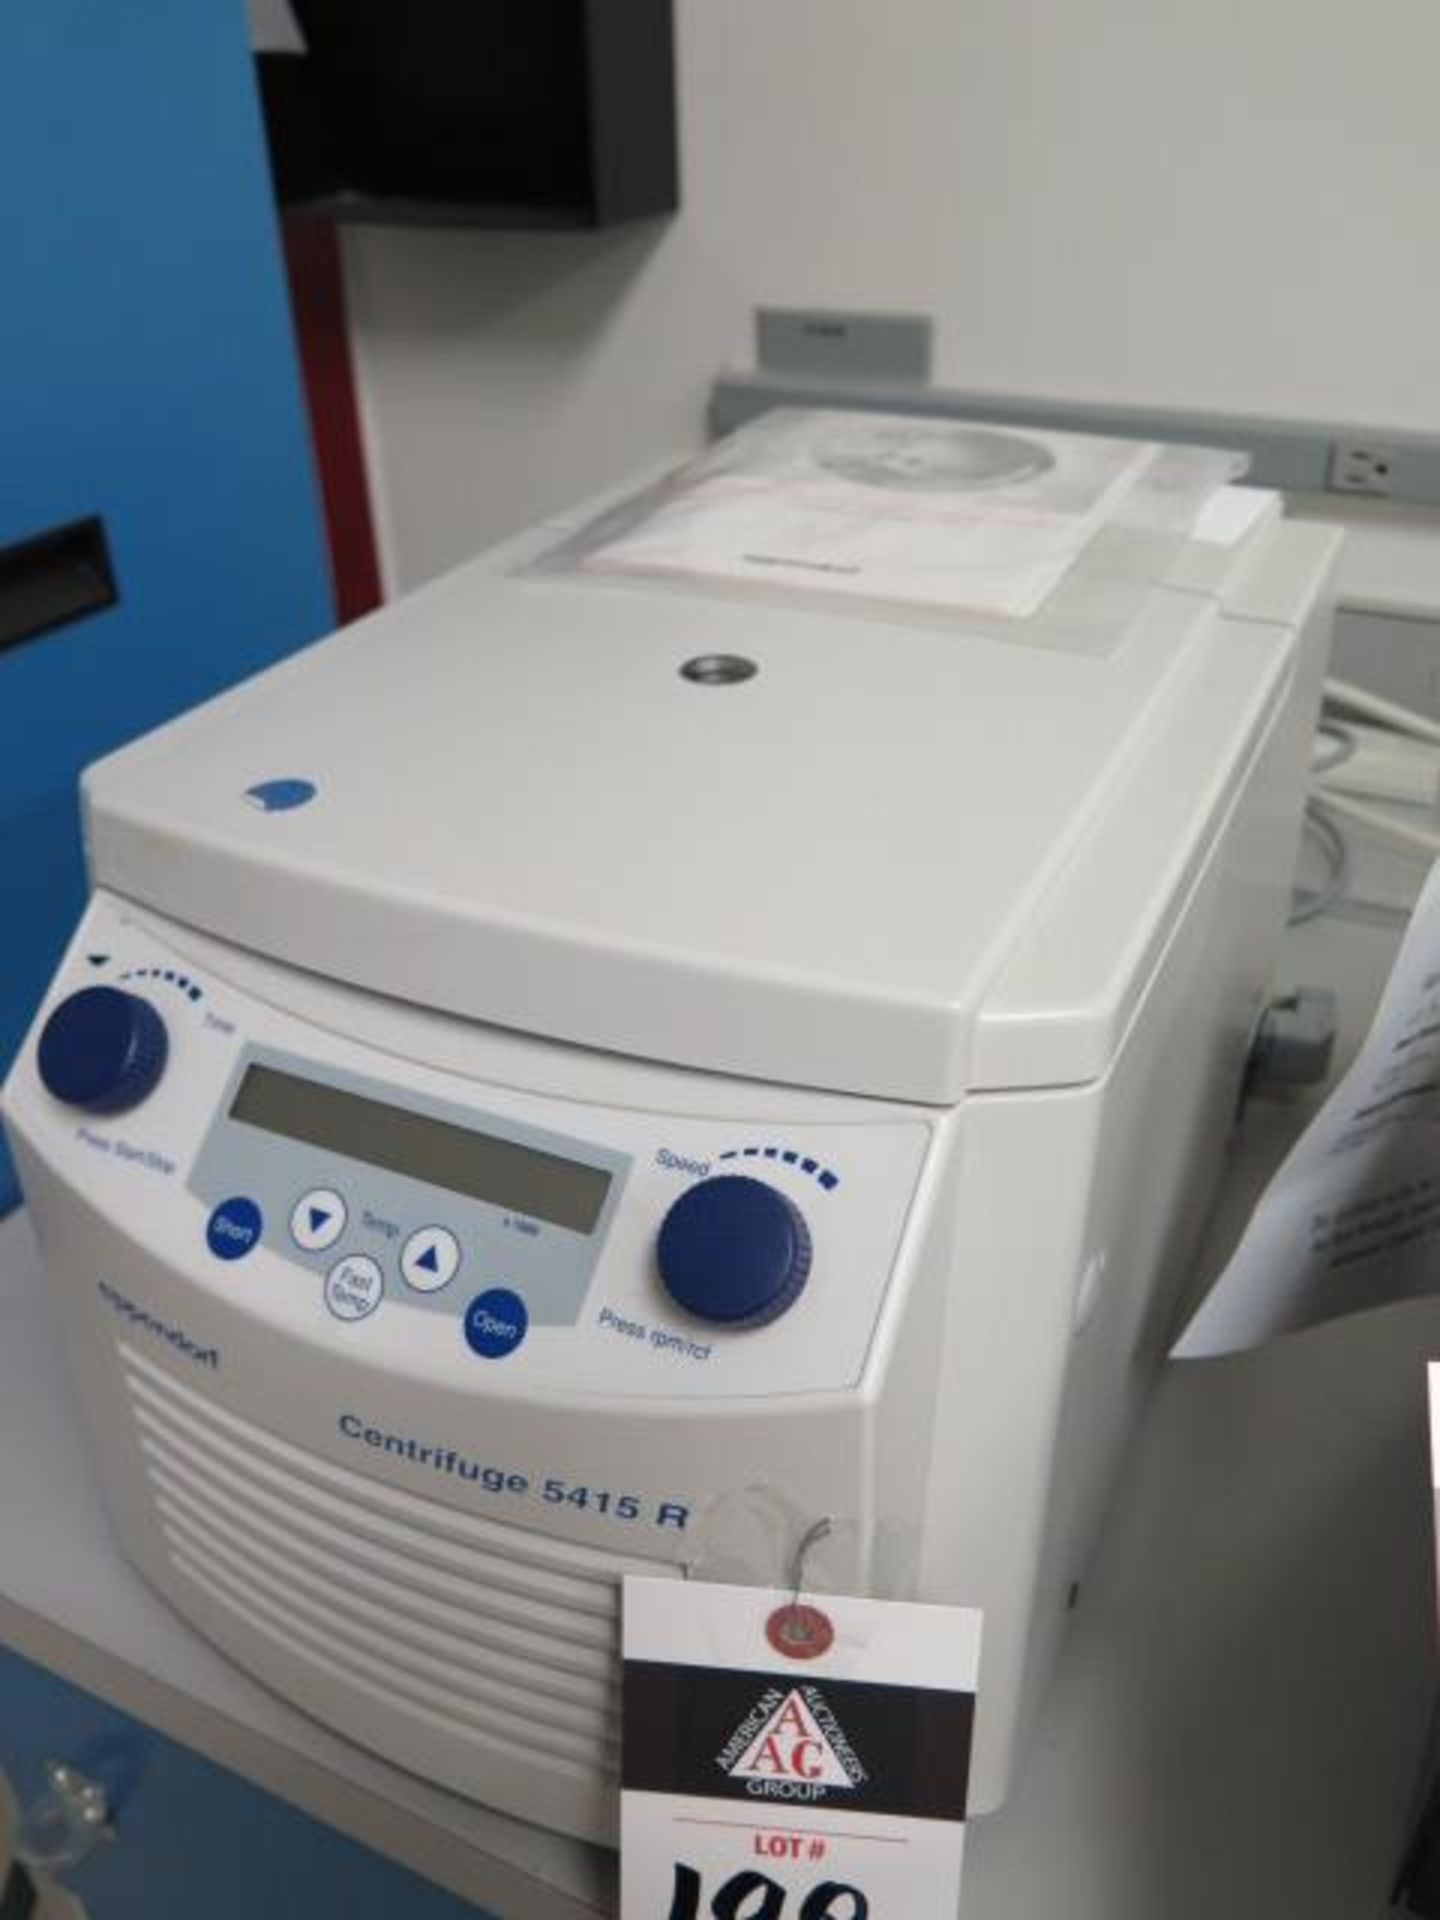 Eppendorf mdl. 5415R Refrigerated Centrifuge s/n 0023353 (SOLD AS-IS - NO WARRANTY) - Image 3 of 7